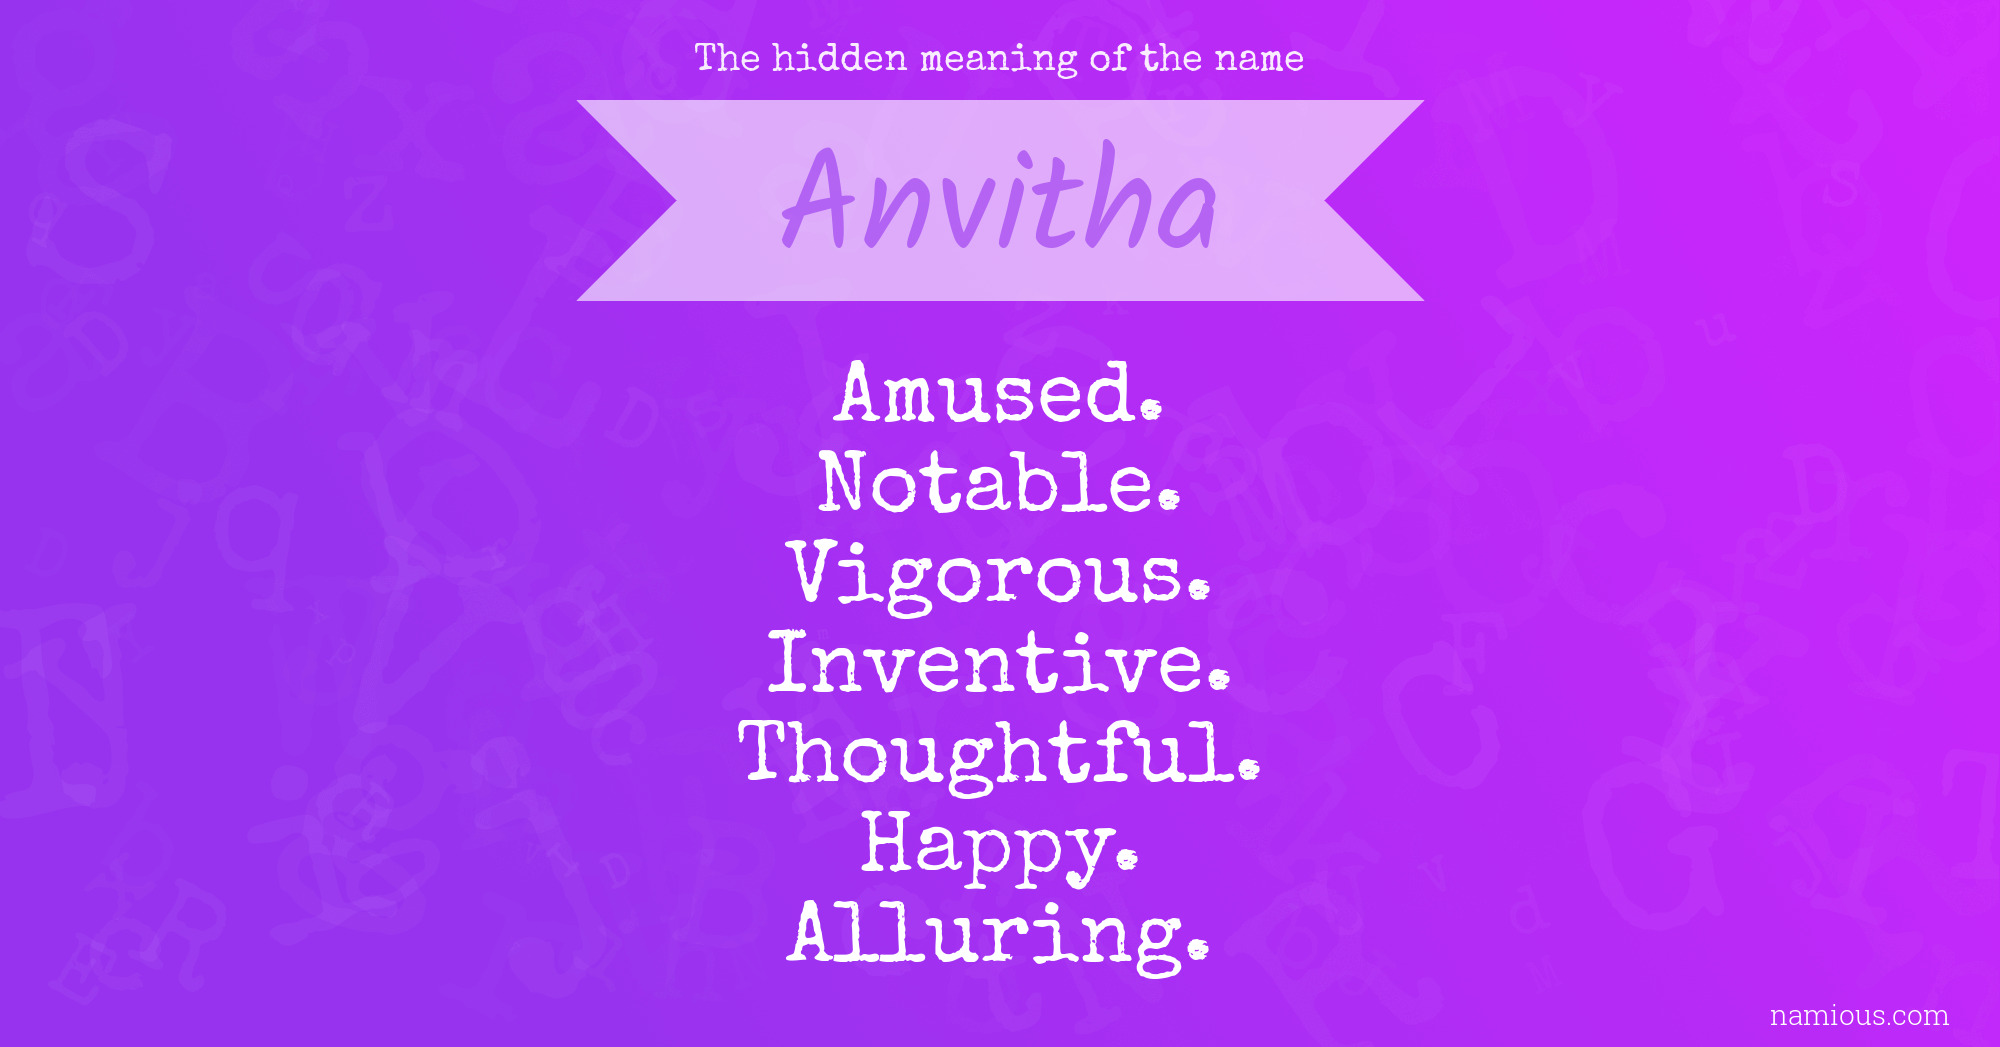 The hidden meaning of the name Anvitha